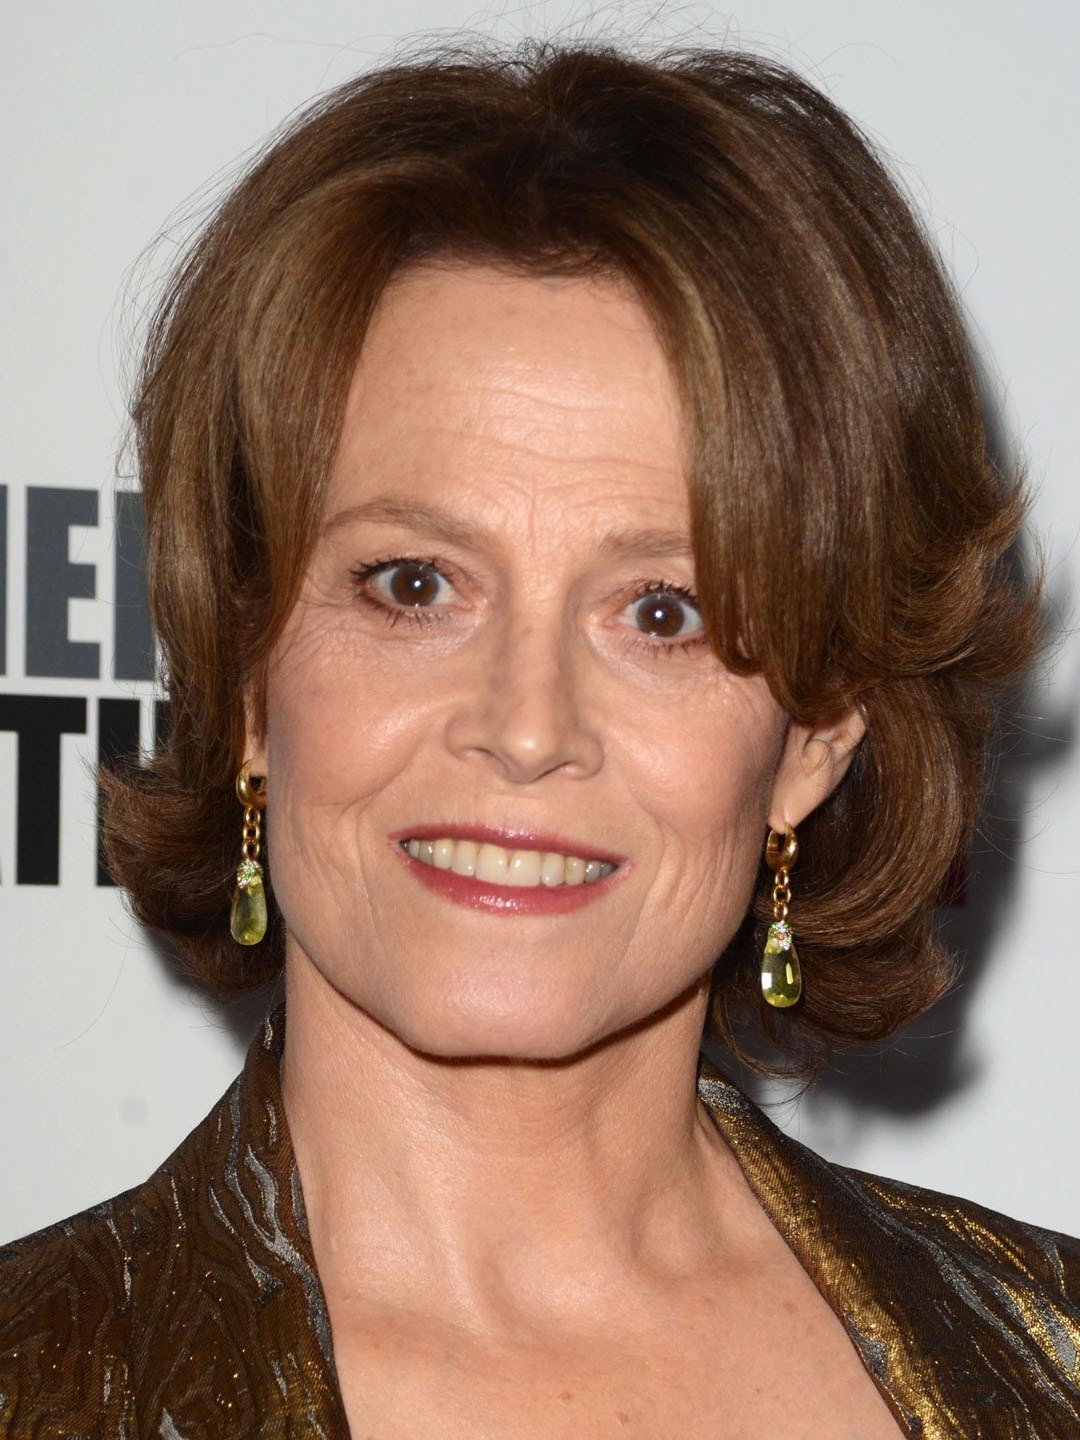 How tall is Sigourney Weaver?